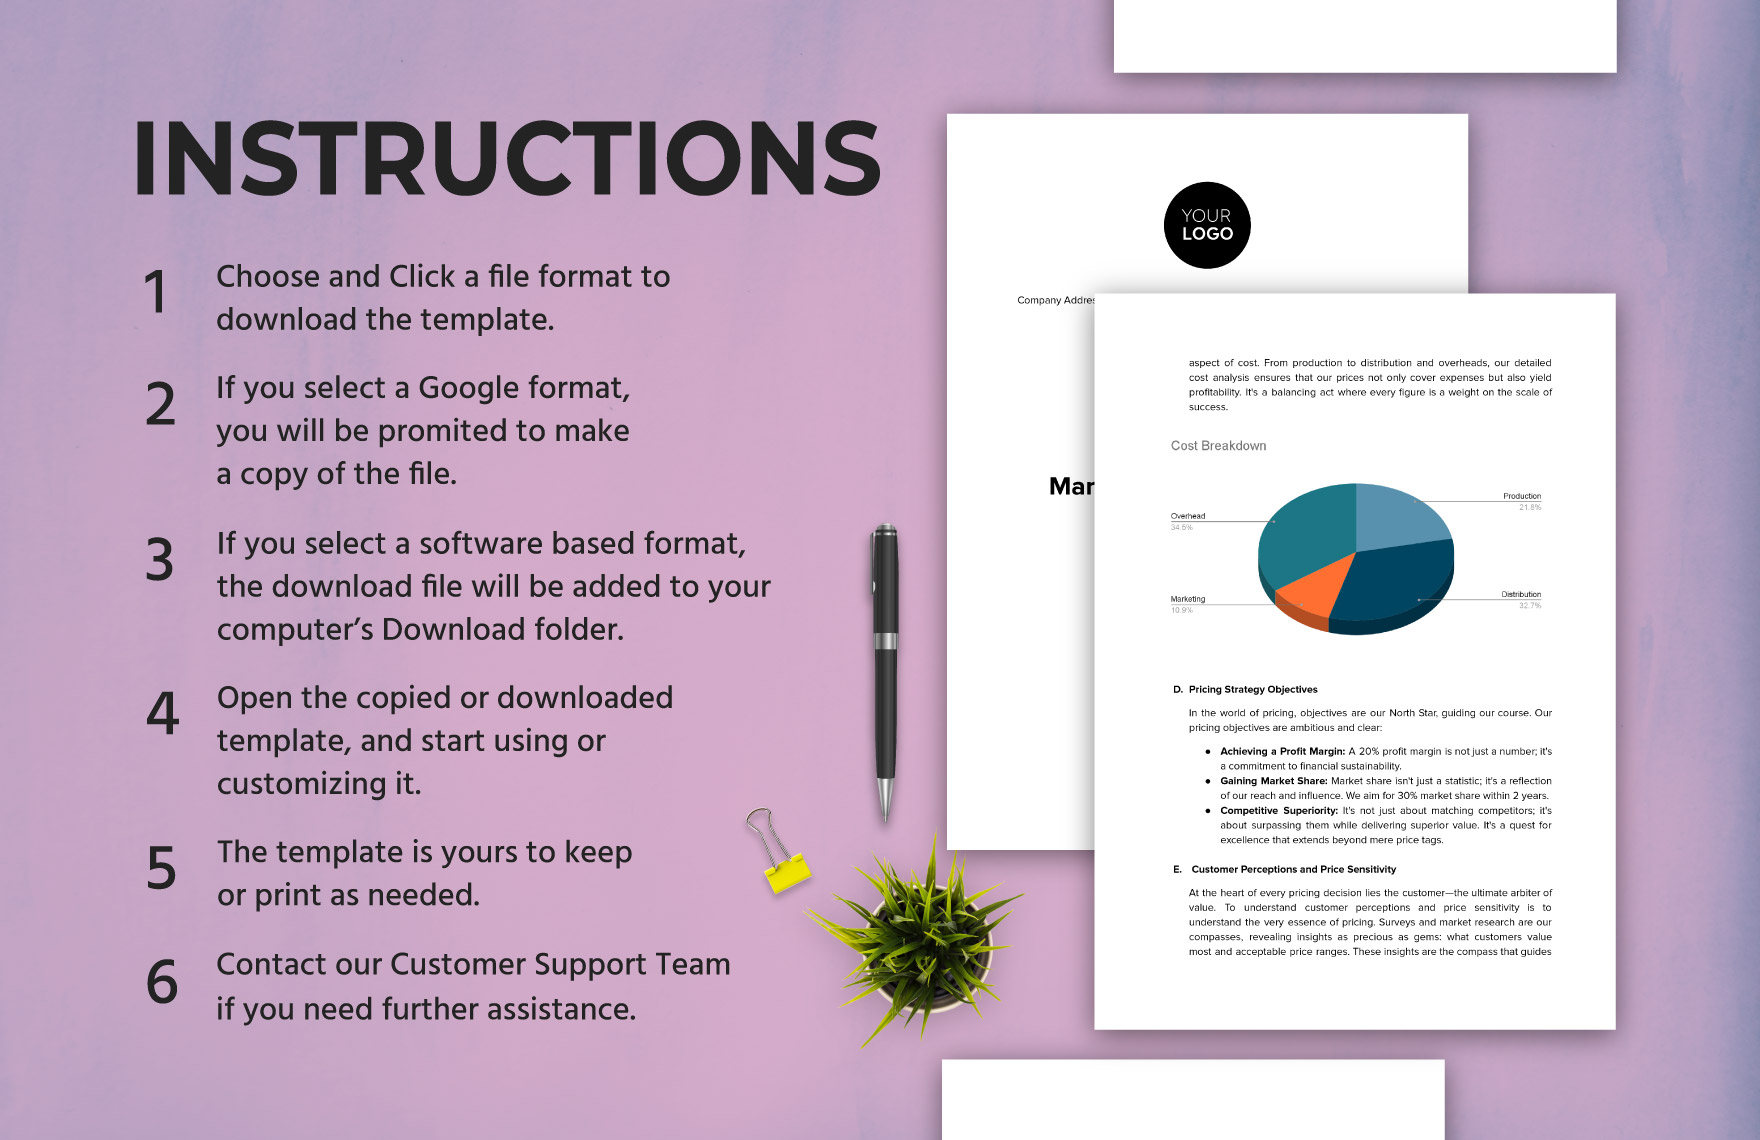 Marketing Pricing Strategy Document Template